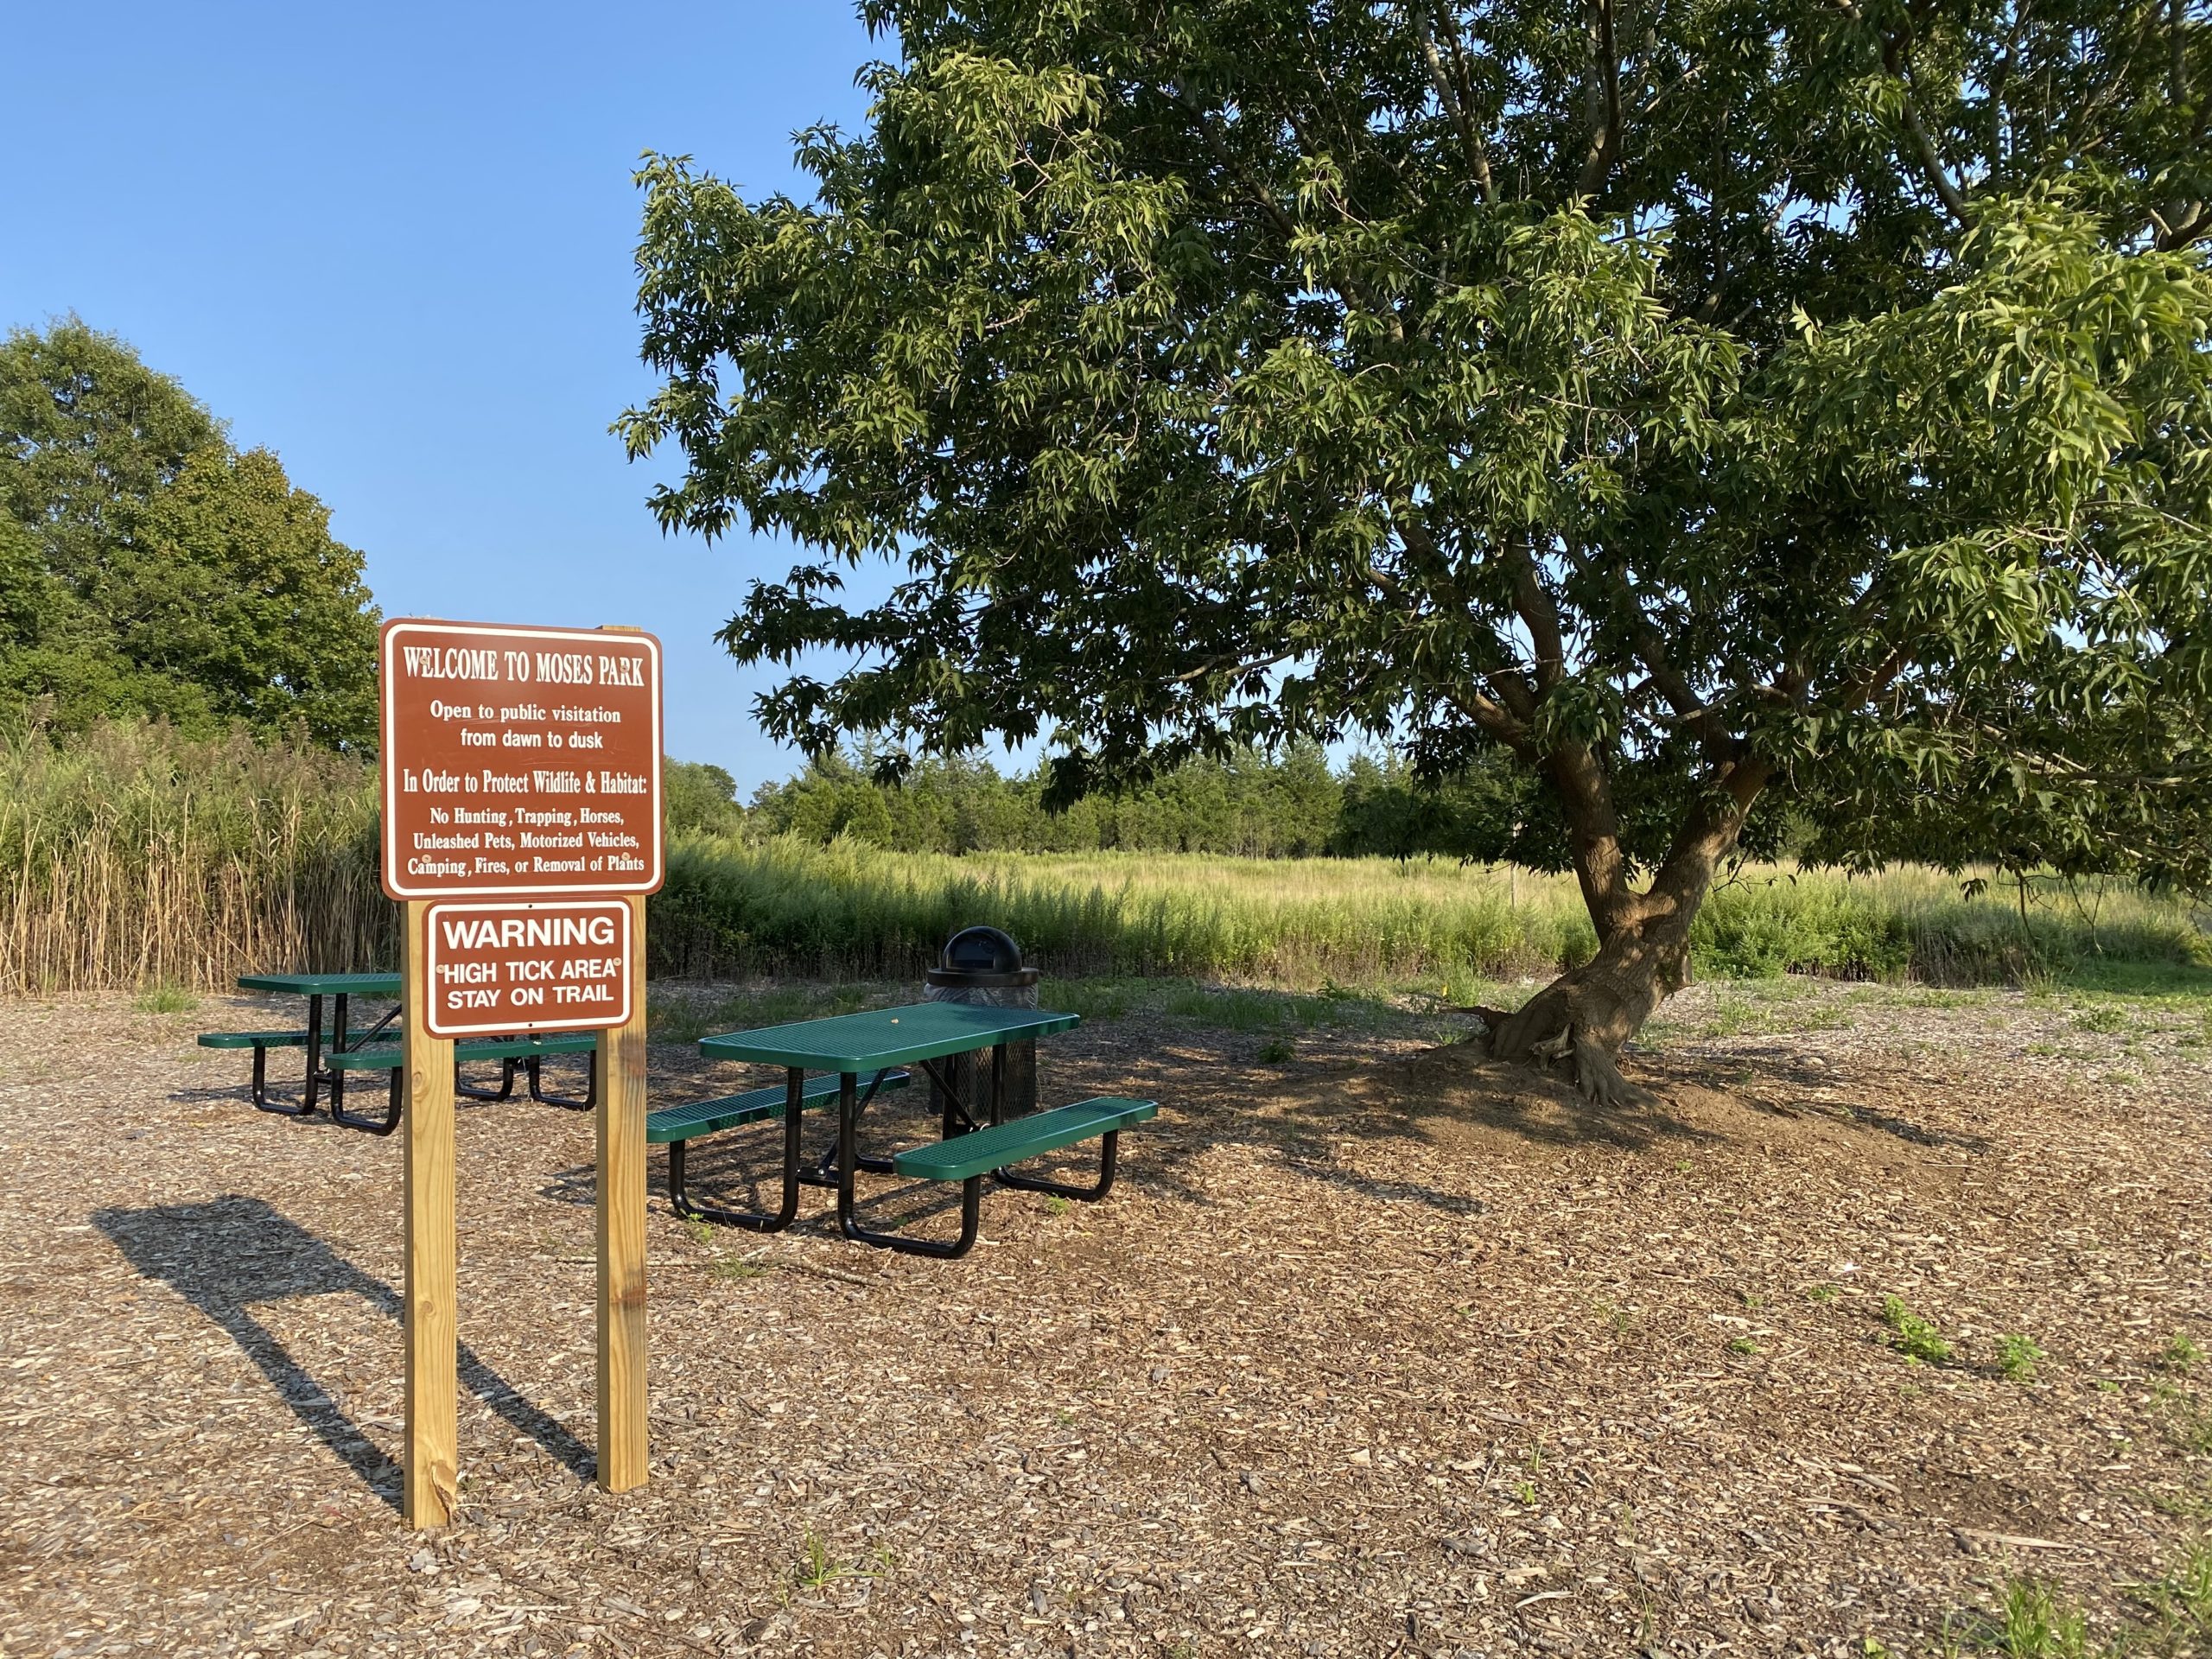 The Community Preservation Fund purchased and preserved the land that would become Moses Park in Southampton Village.